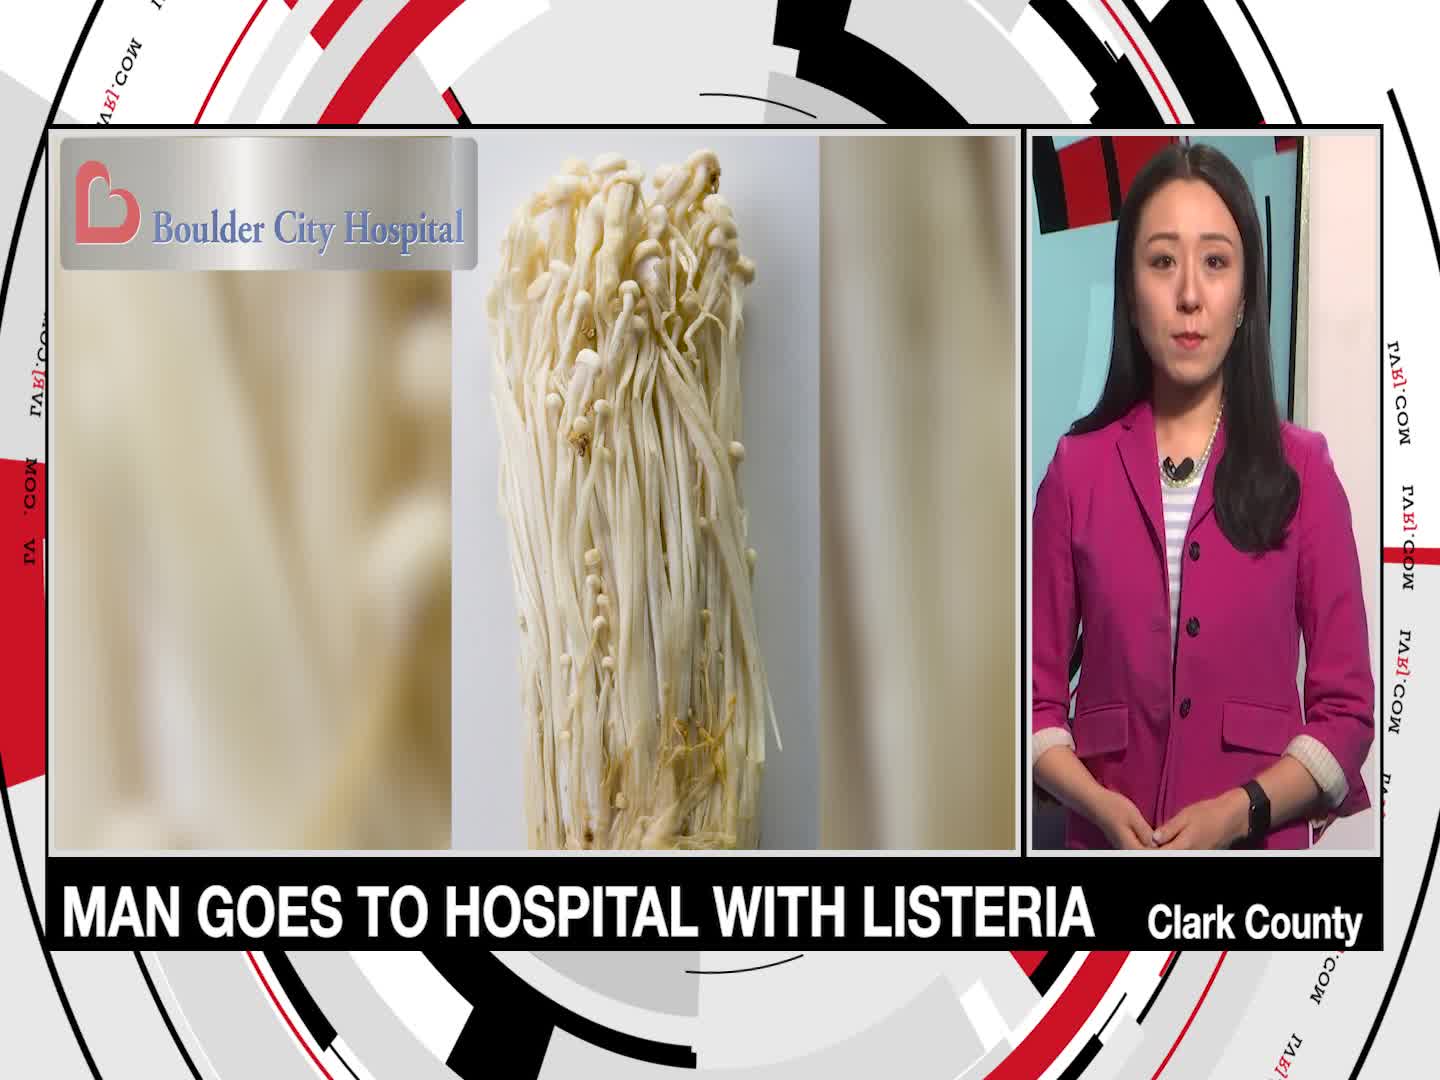 Clark County man hospitalized with listeria after eating enoki mushrooms